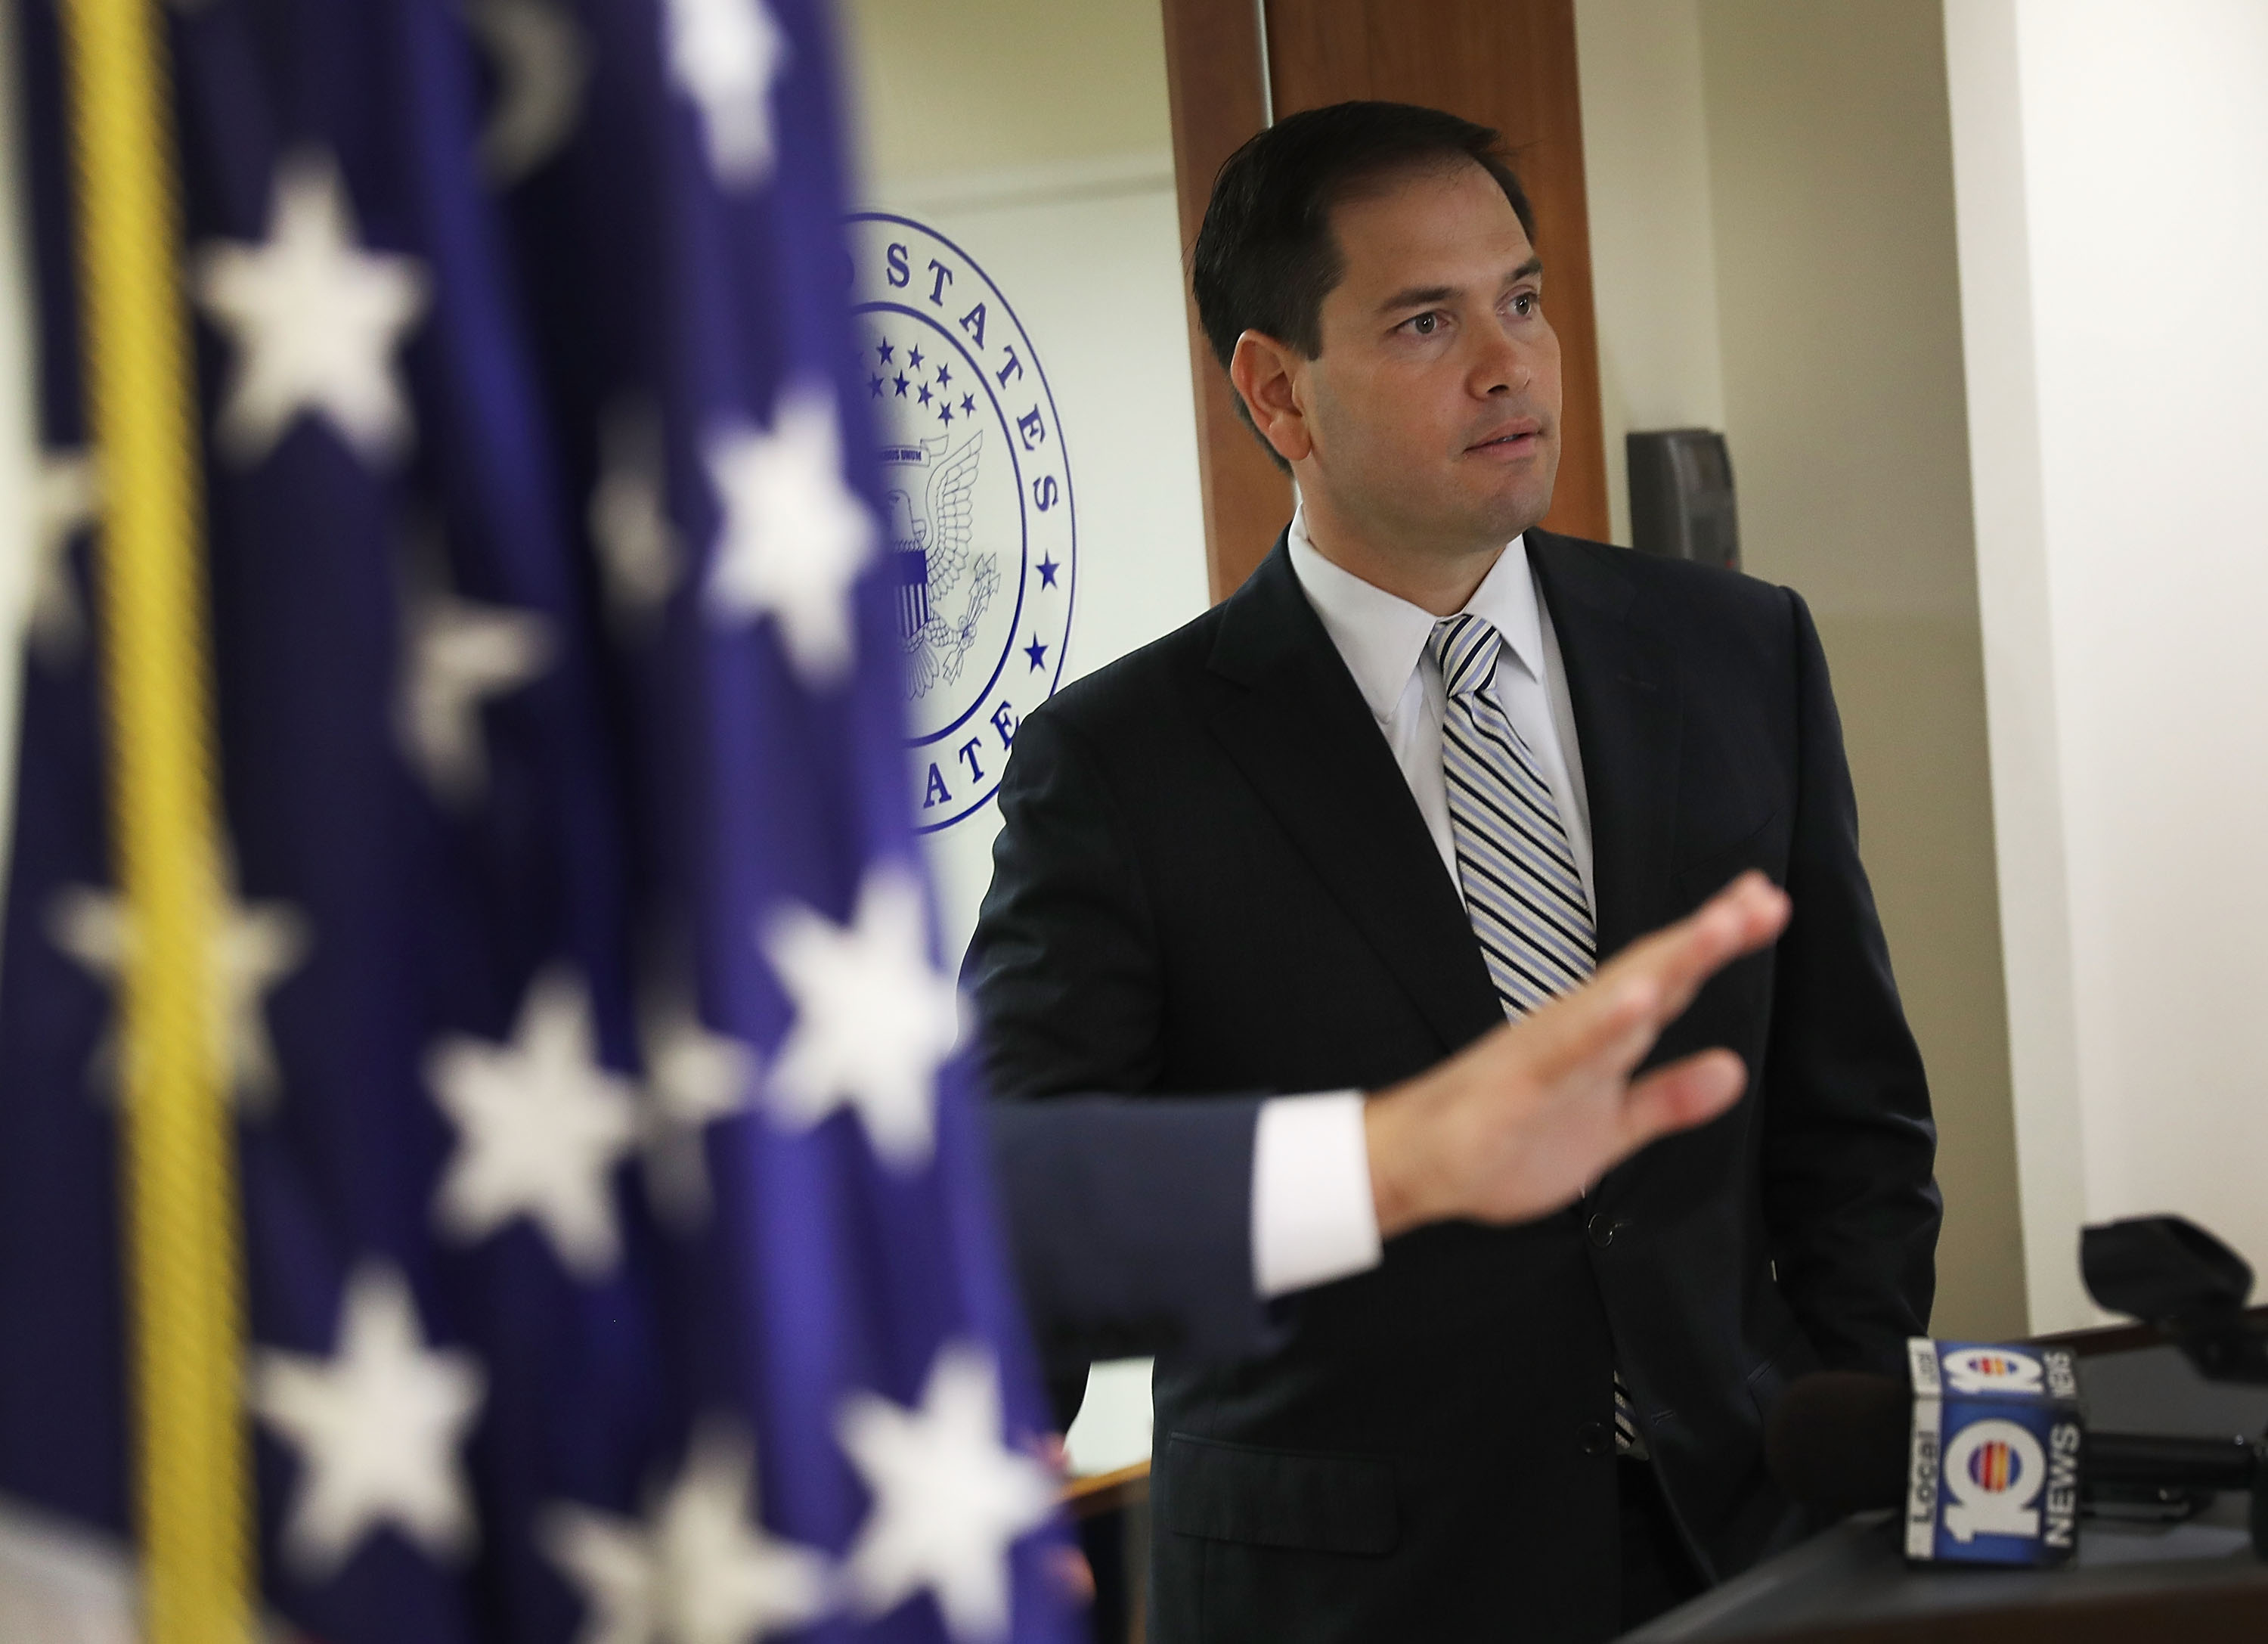 Sen. Marco Rubio (R-FL) speaks to the media to urge the United States Congress to pass funding to combat the mosquito-borne Zika virus on June 3, 2016 in Doral, Florida. Joe Raedle&mdash;Getty Images (Joe Raedle&mdash;Getty Images)